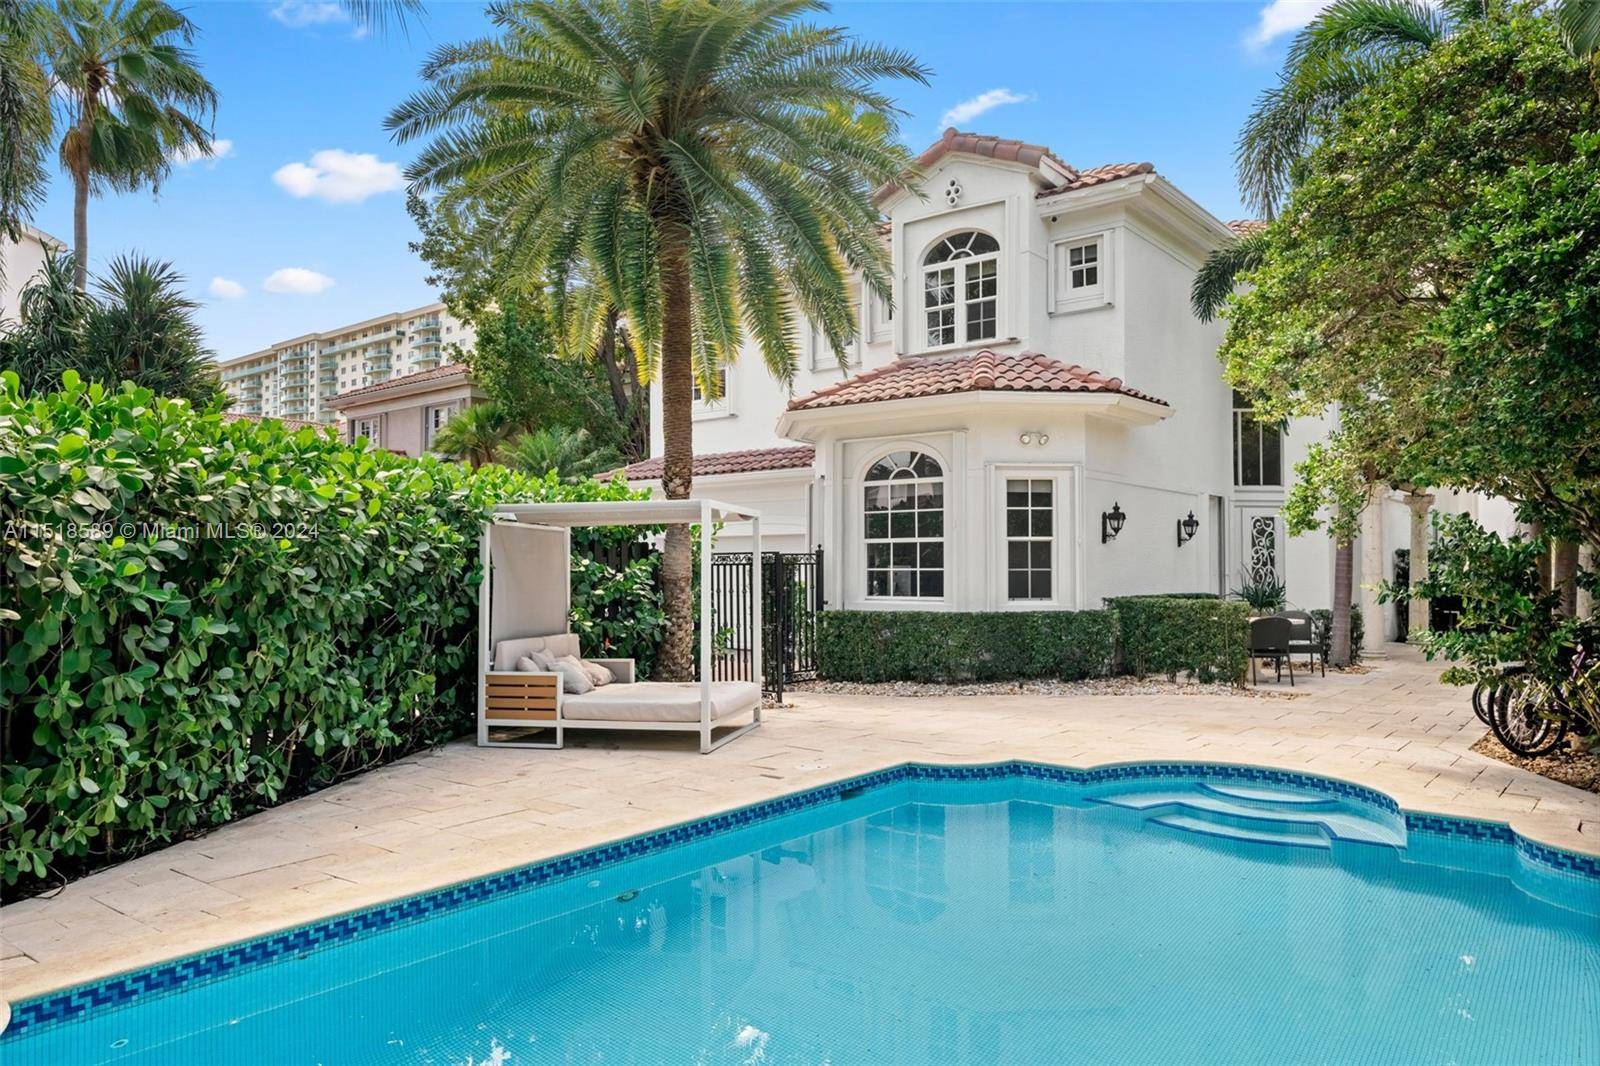 Located on an oversized corner lot, this very private residence has 6 bedrooms and 4.